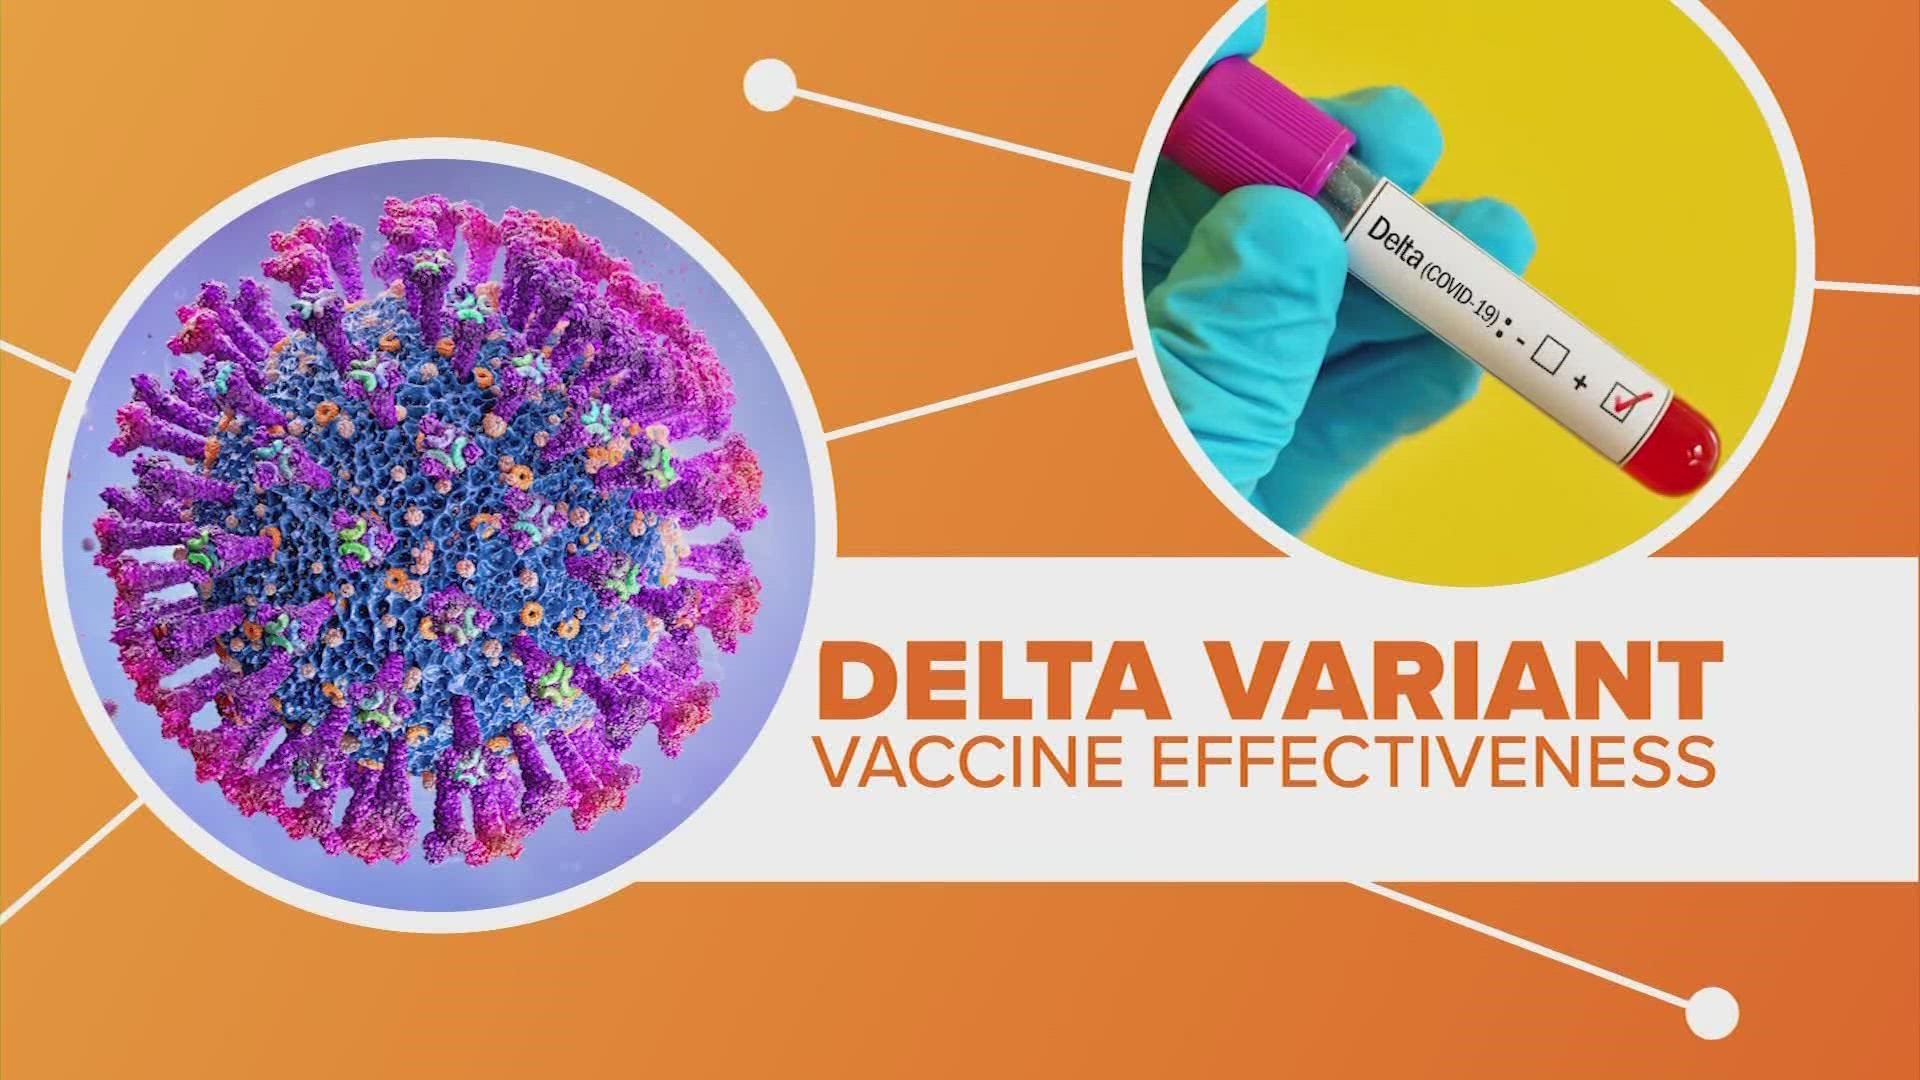 New research suggests Moderna vaccine performs better against the delta COVID-19 variant.